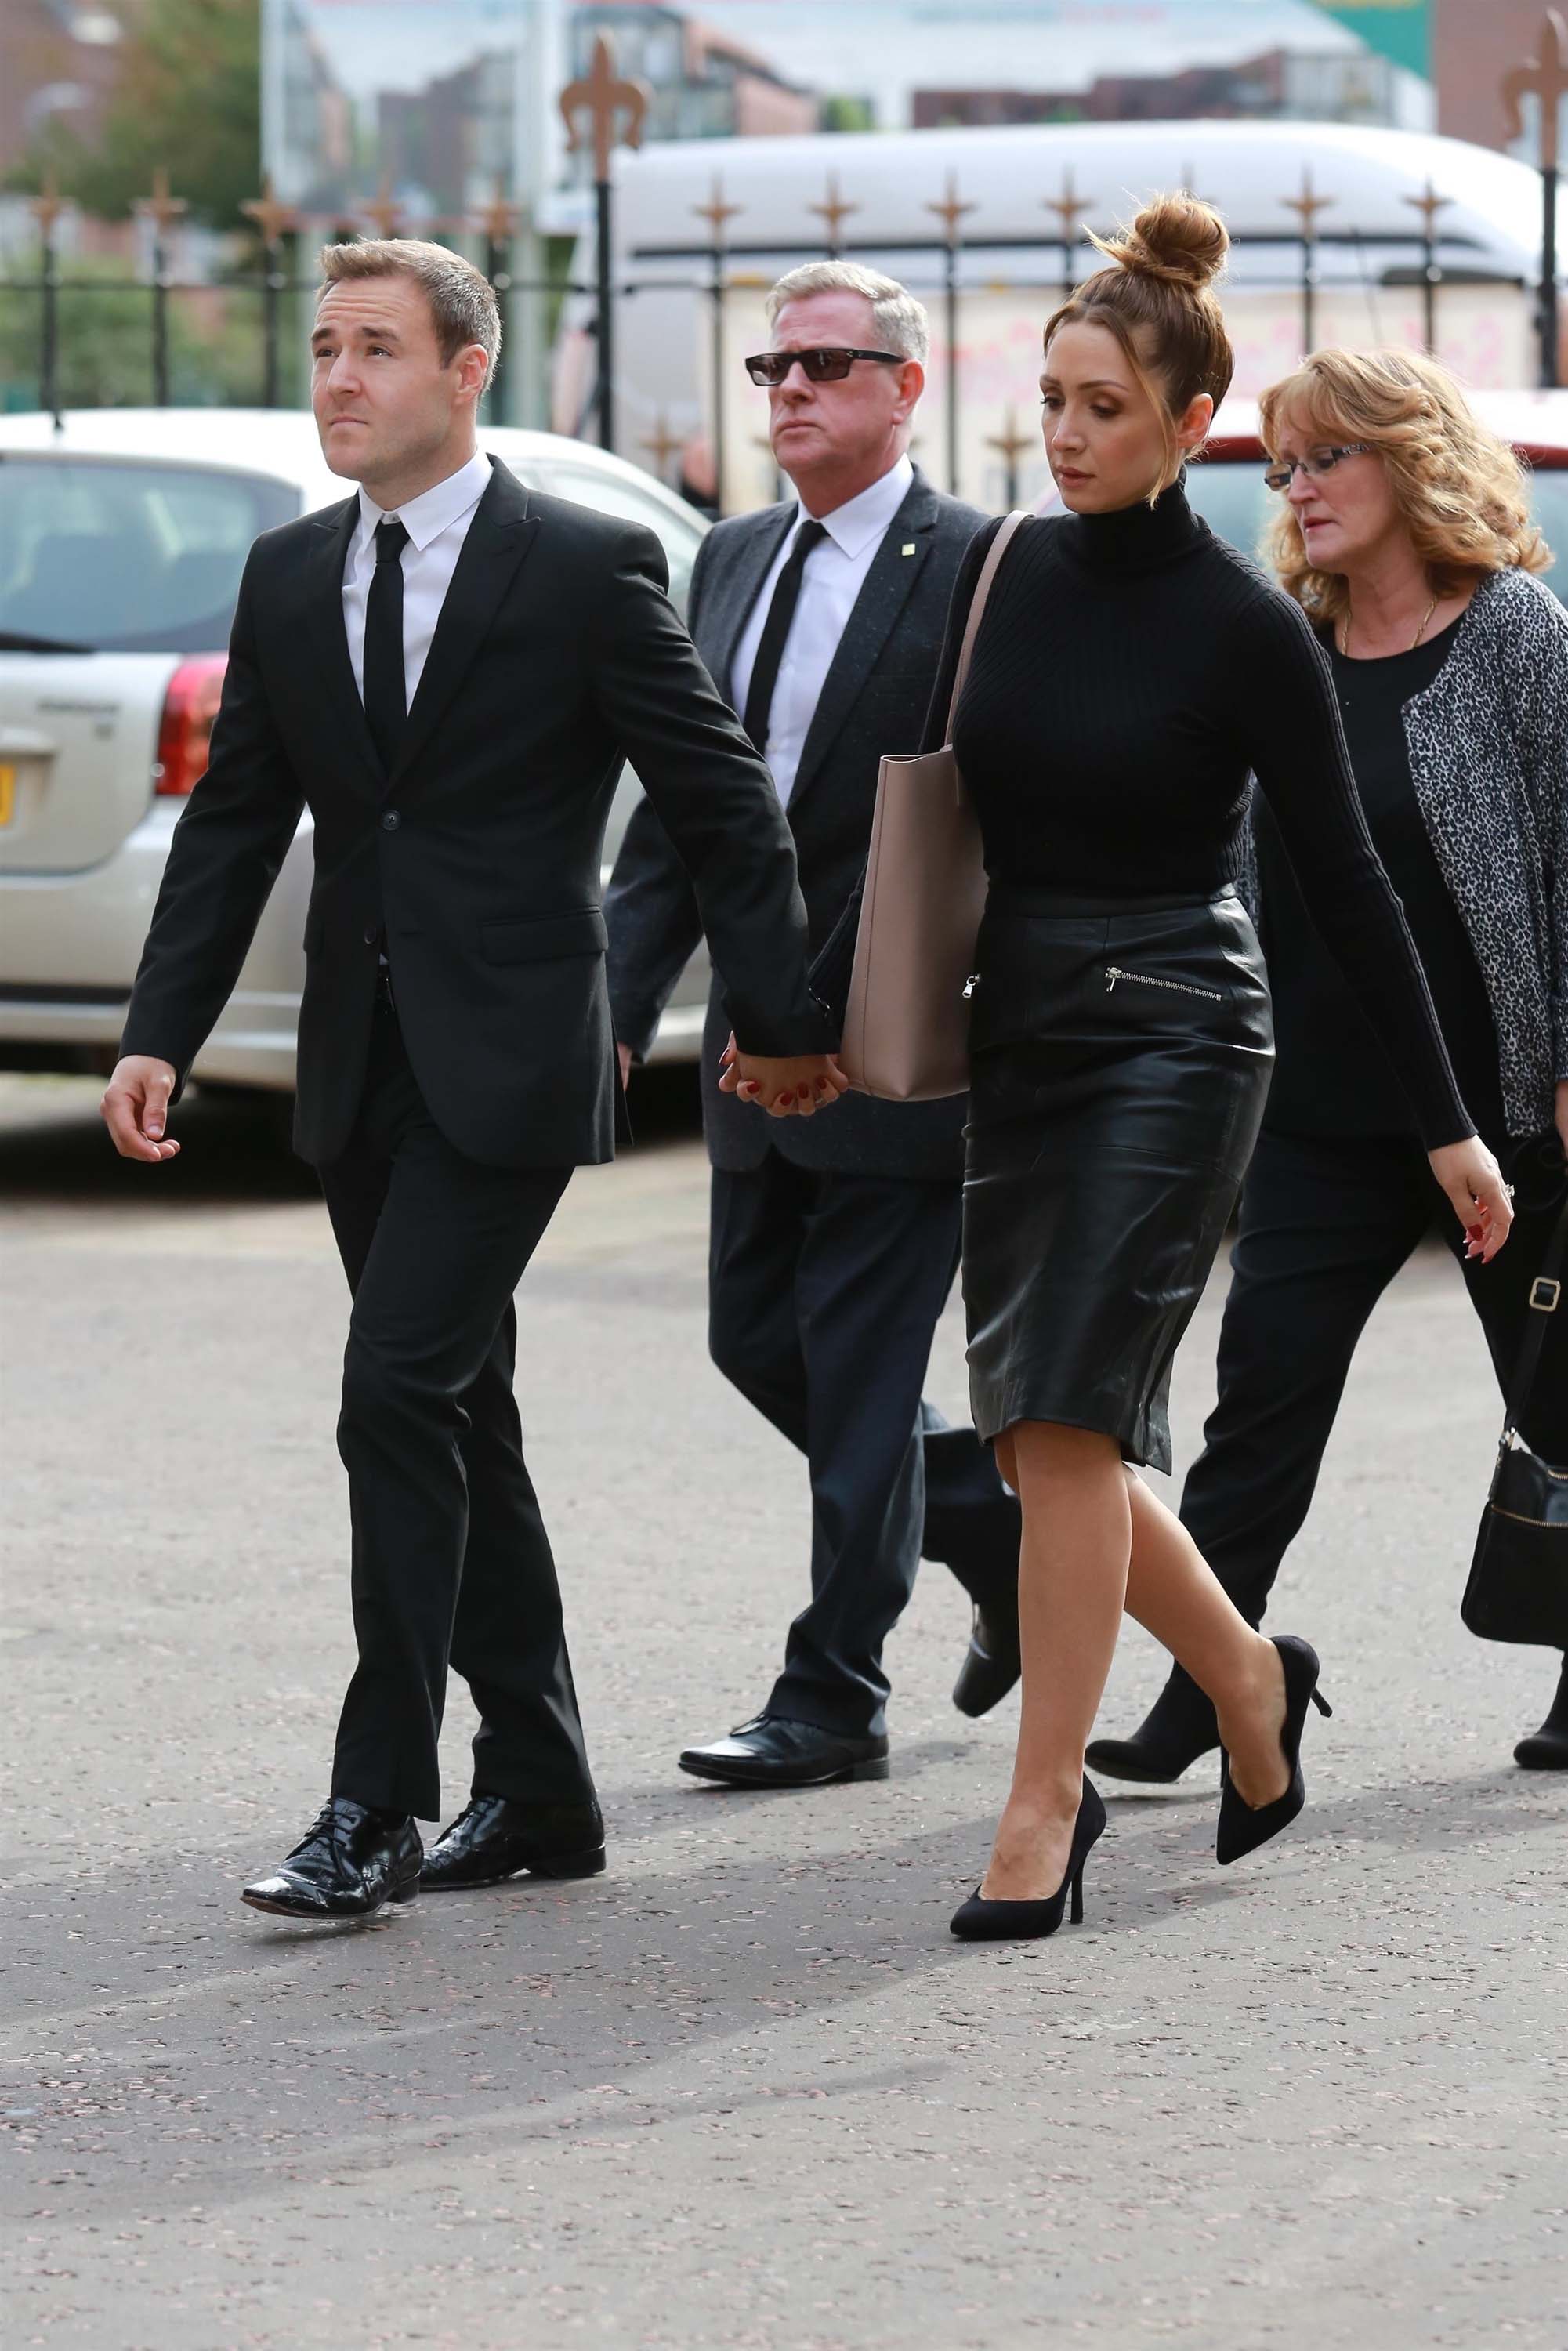 Lucy-Jo Hudson arriving for the funeral of Liz Dawn